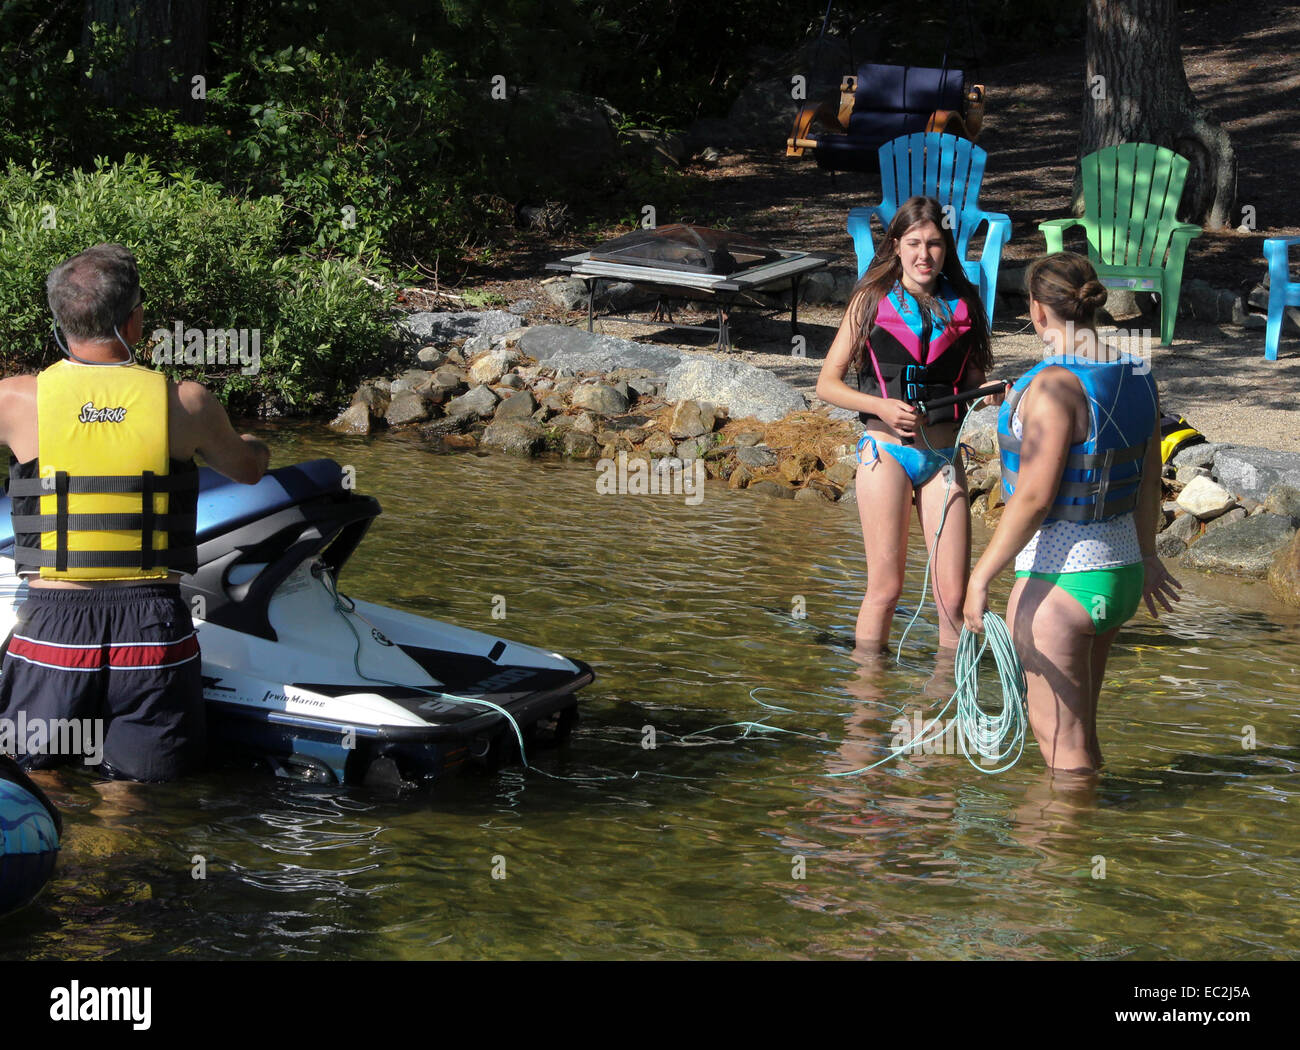 Young girls in bikinis and life vests getting ready to water ski. Stock Photo